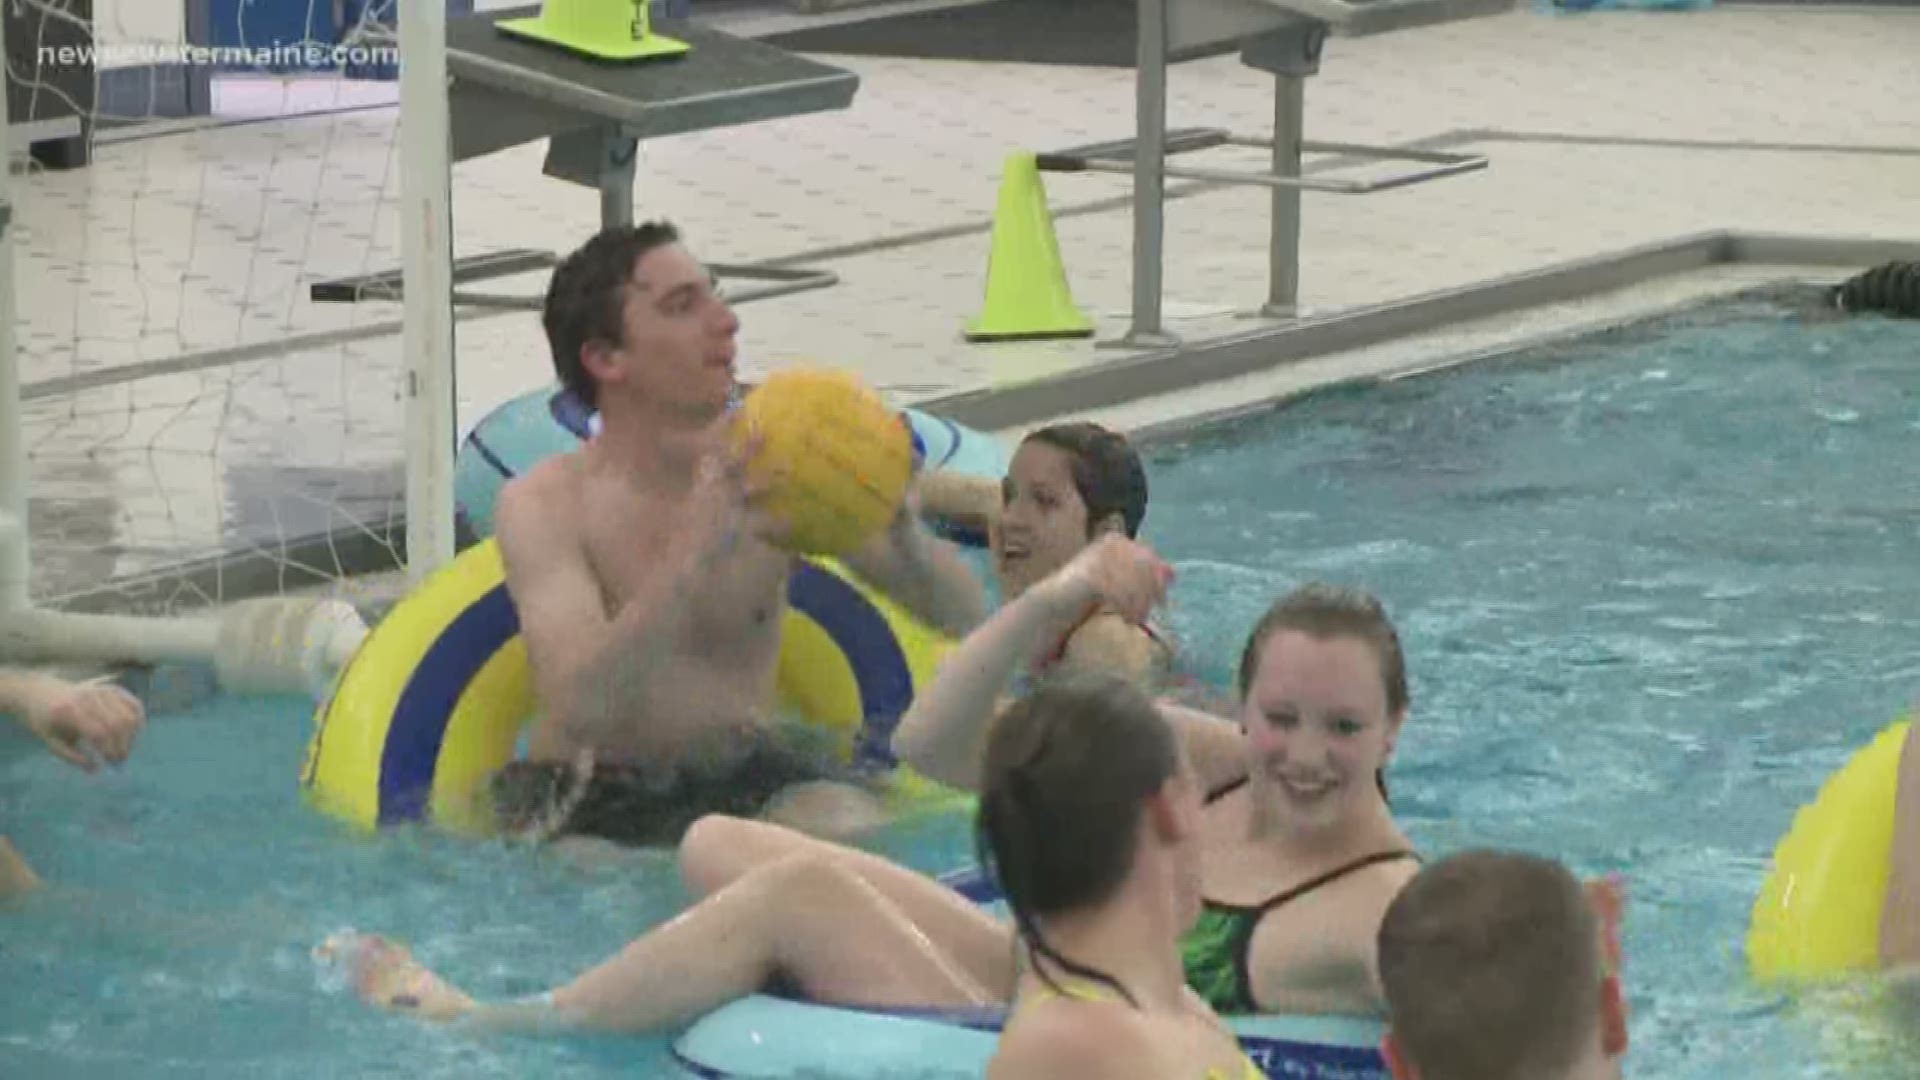 Casco Bay Sports hosts an inner tube water polo league, where you'll workout while having fun.